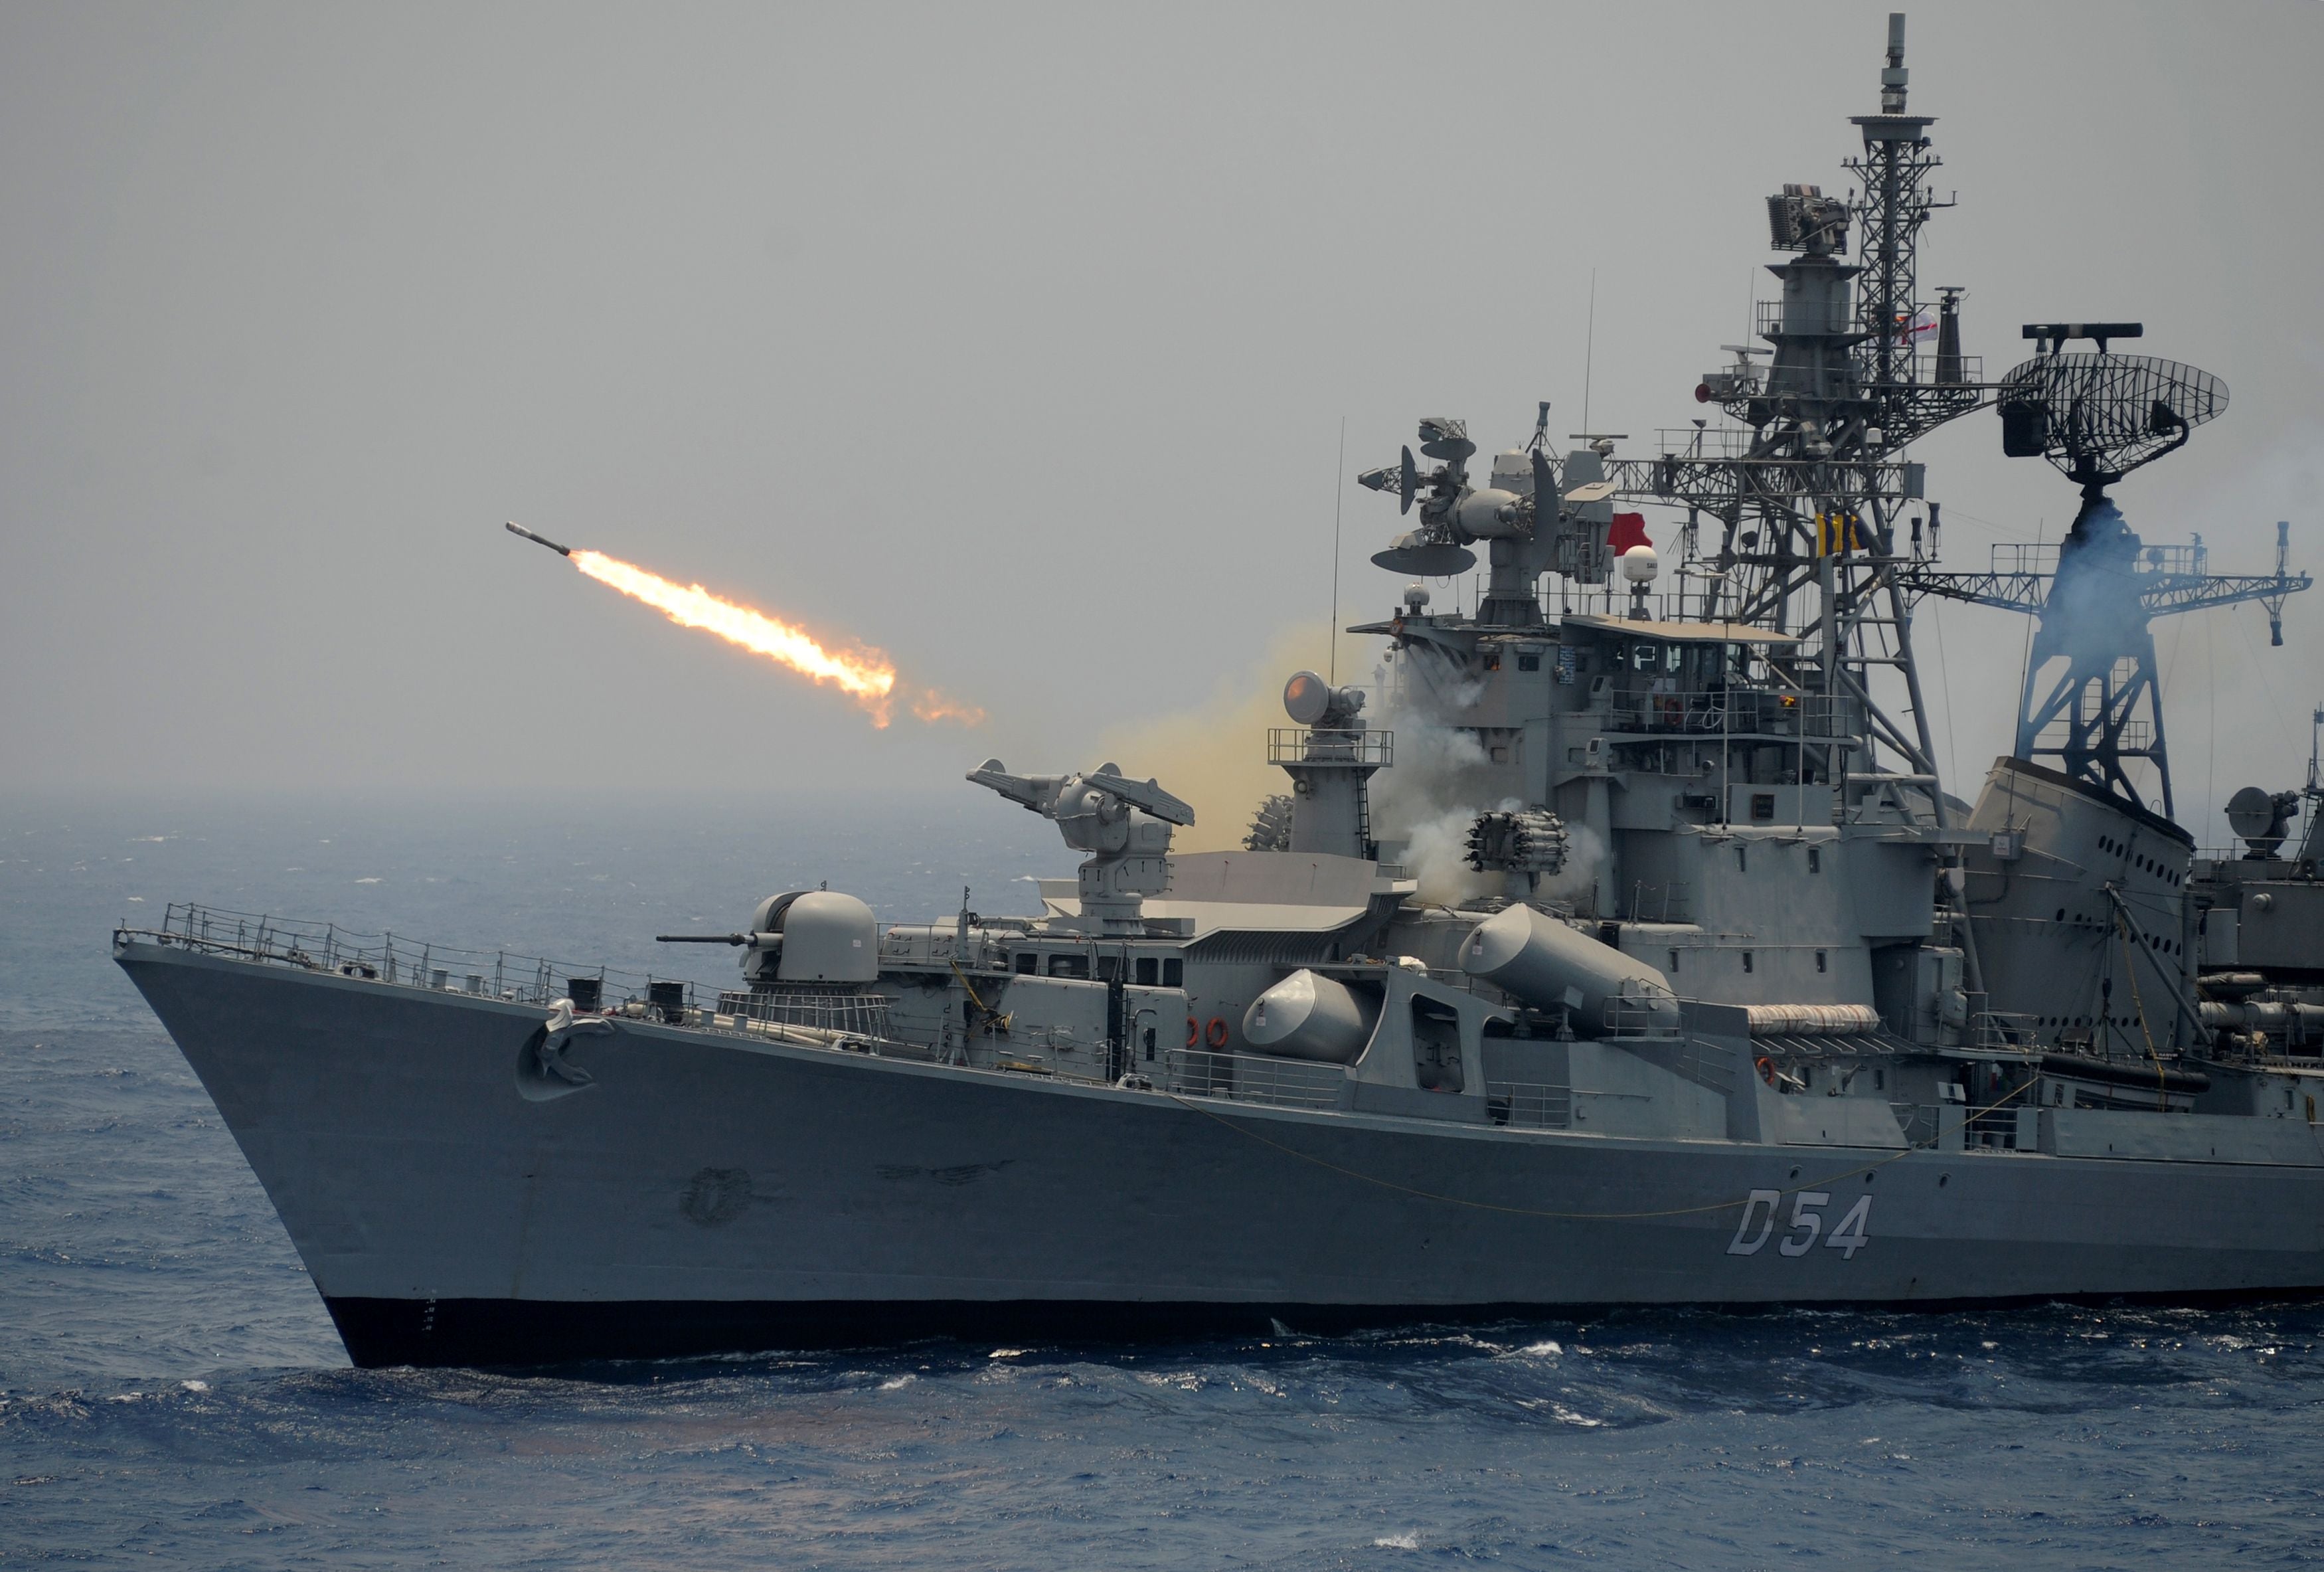 File: A rocket is fired from the Indian Navy destroyer ship INS Ranvir during an exercise drill in the Bay Of Bengal